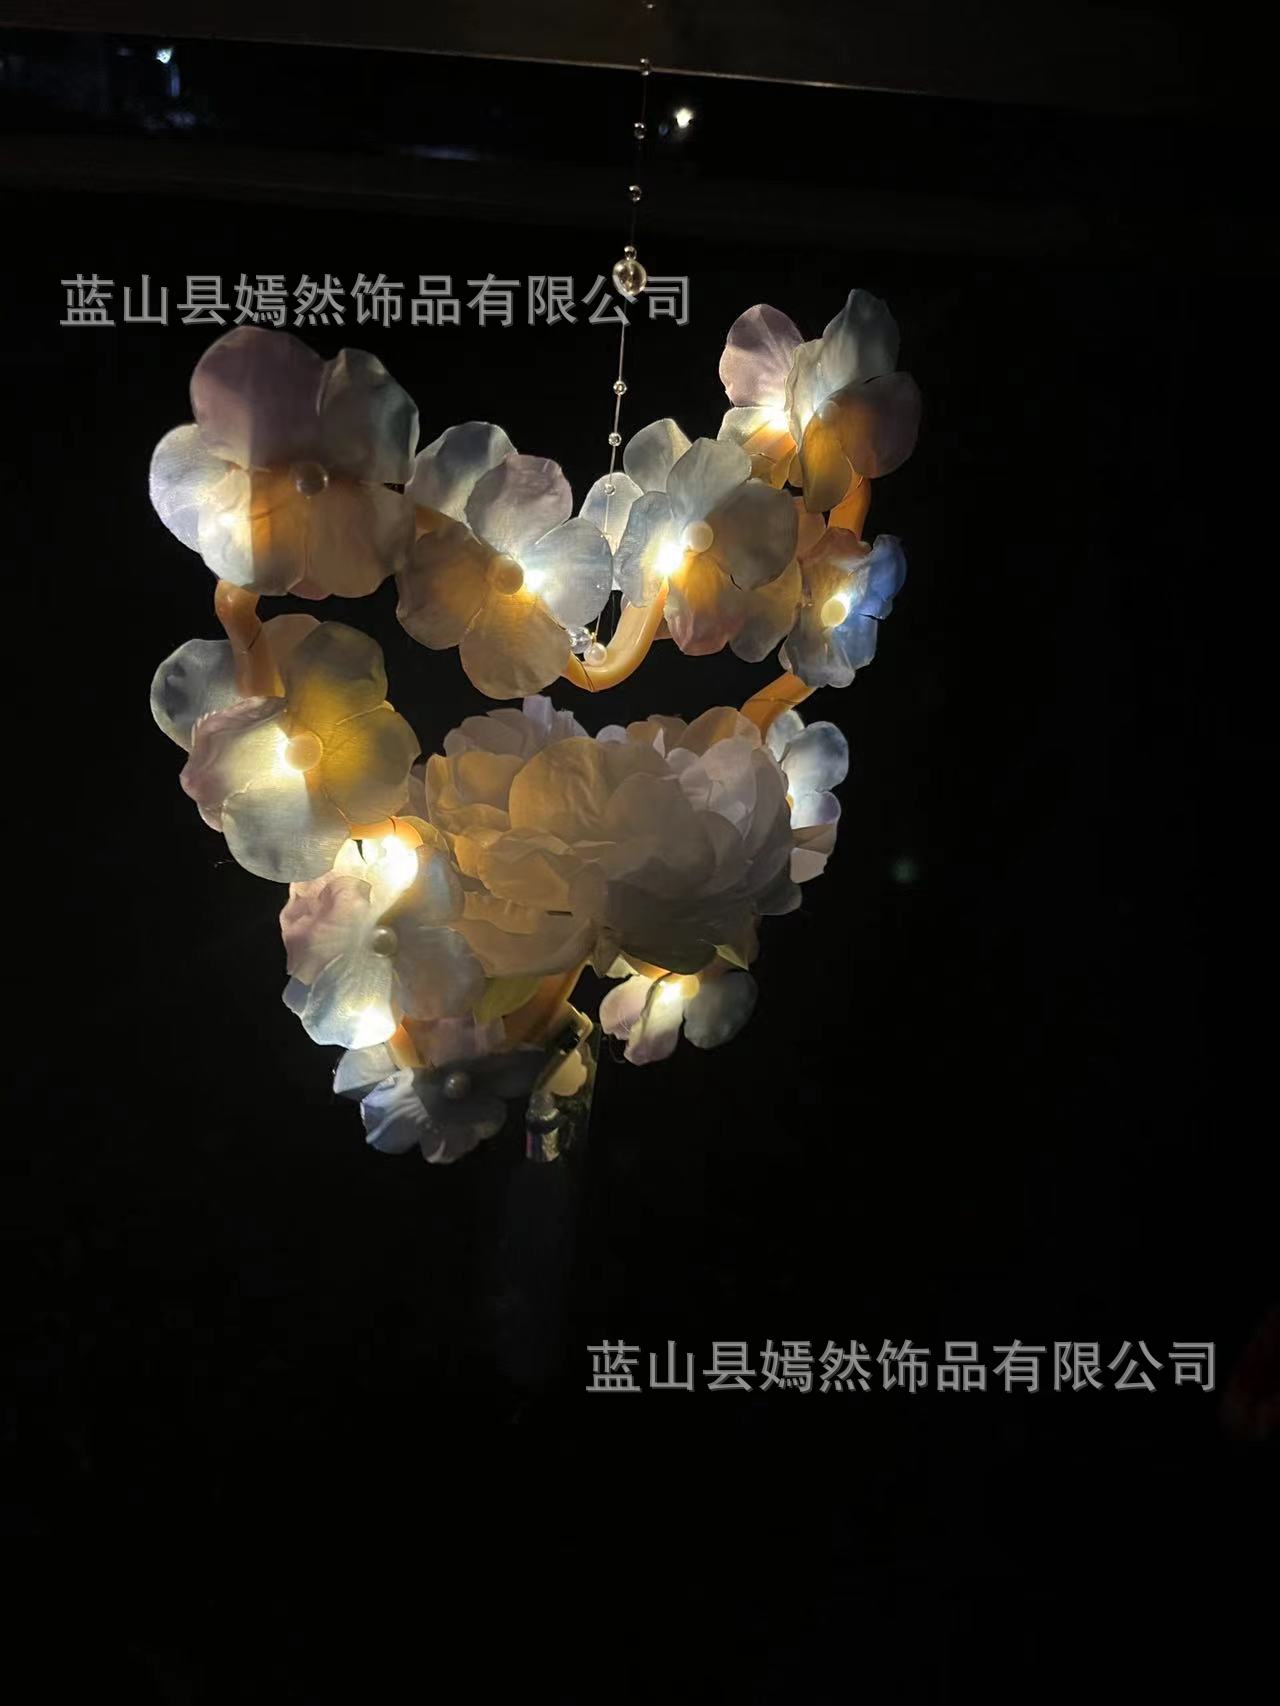 Wholesale Scenic Spot Stall Butterfly Shaped Festive Lantern Juanhua Beads Ancient Style Portable Han Chinese Clothing Accessories Photo Props Flower